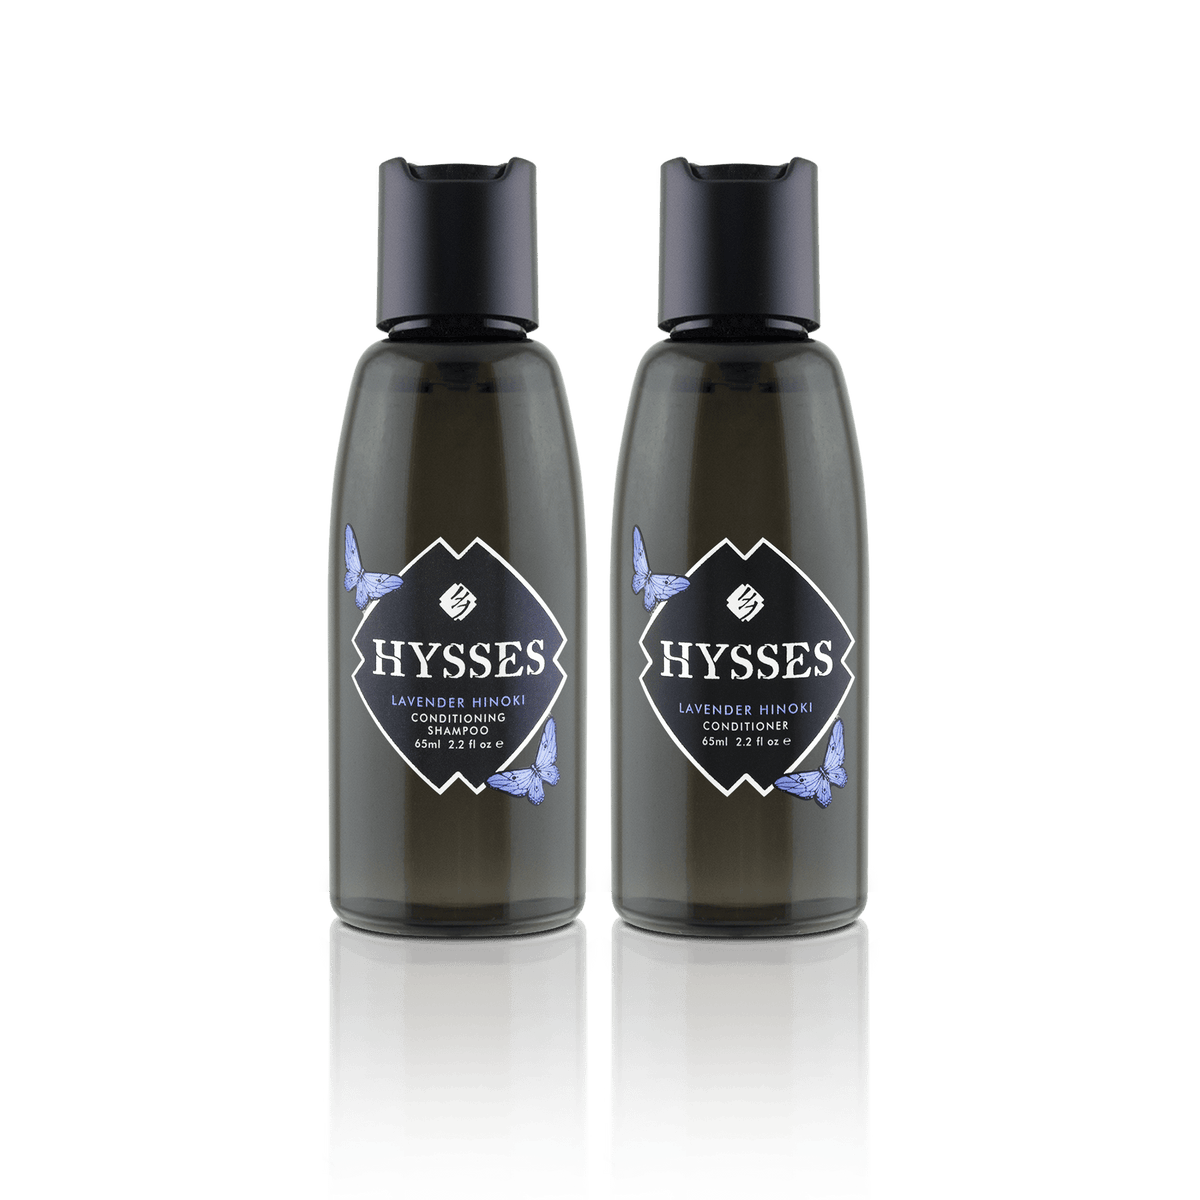 Hysses Hair Care Travel Gift Set (Shampoo &amp; Conditioner)